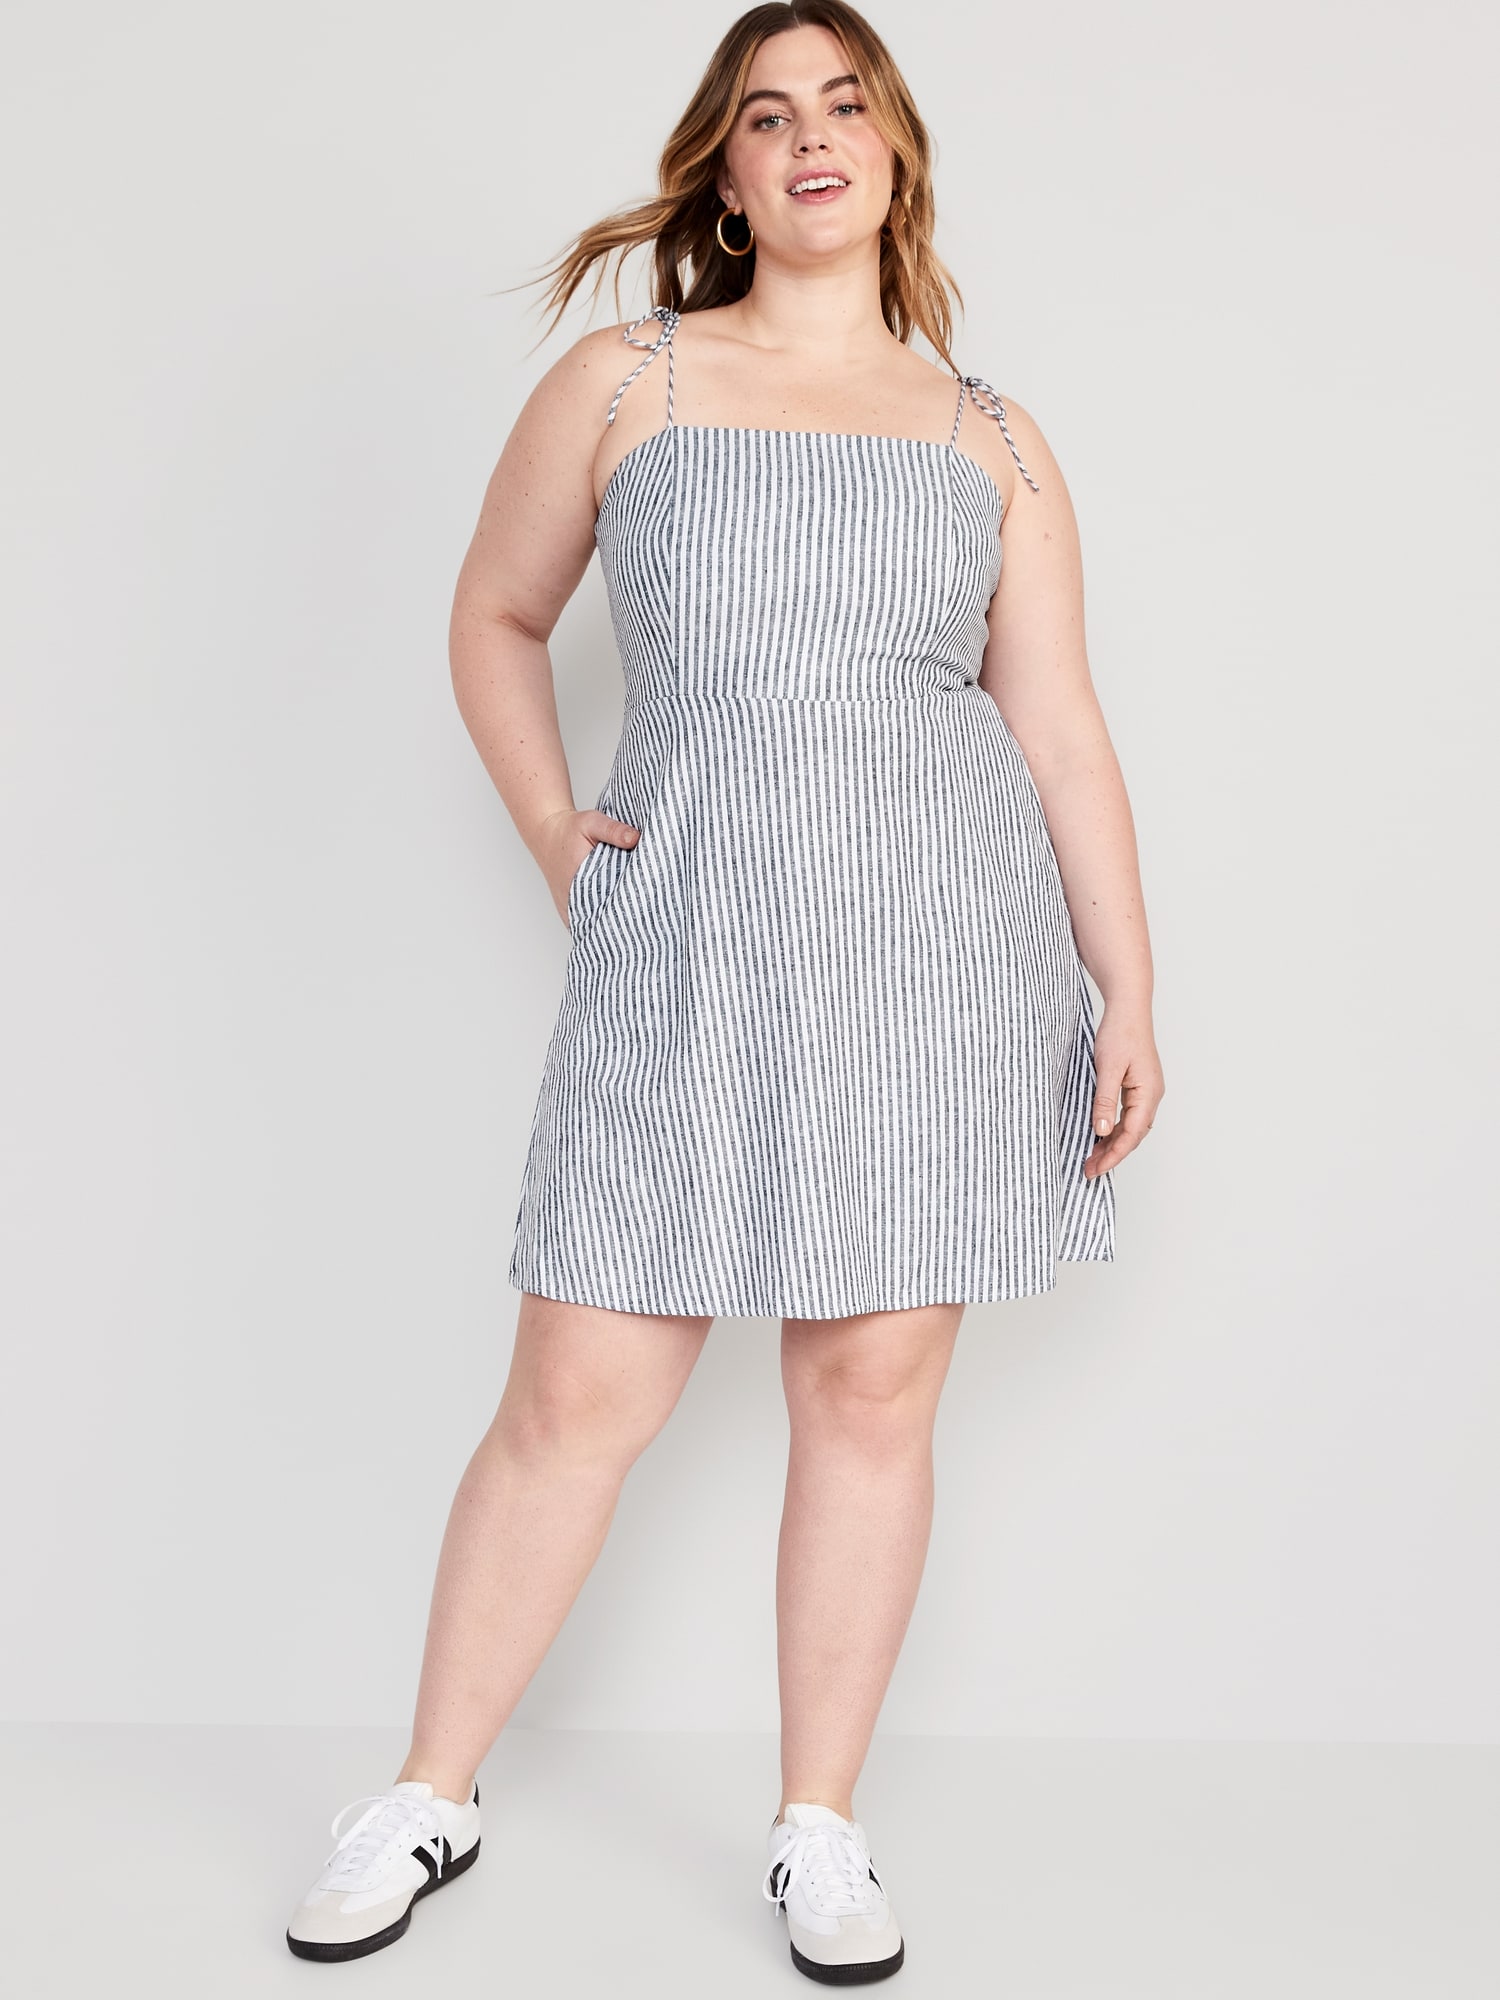 Fit & Flare Matching Tie-Strap Mini Dress for Women | Old Navy